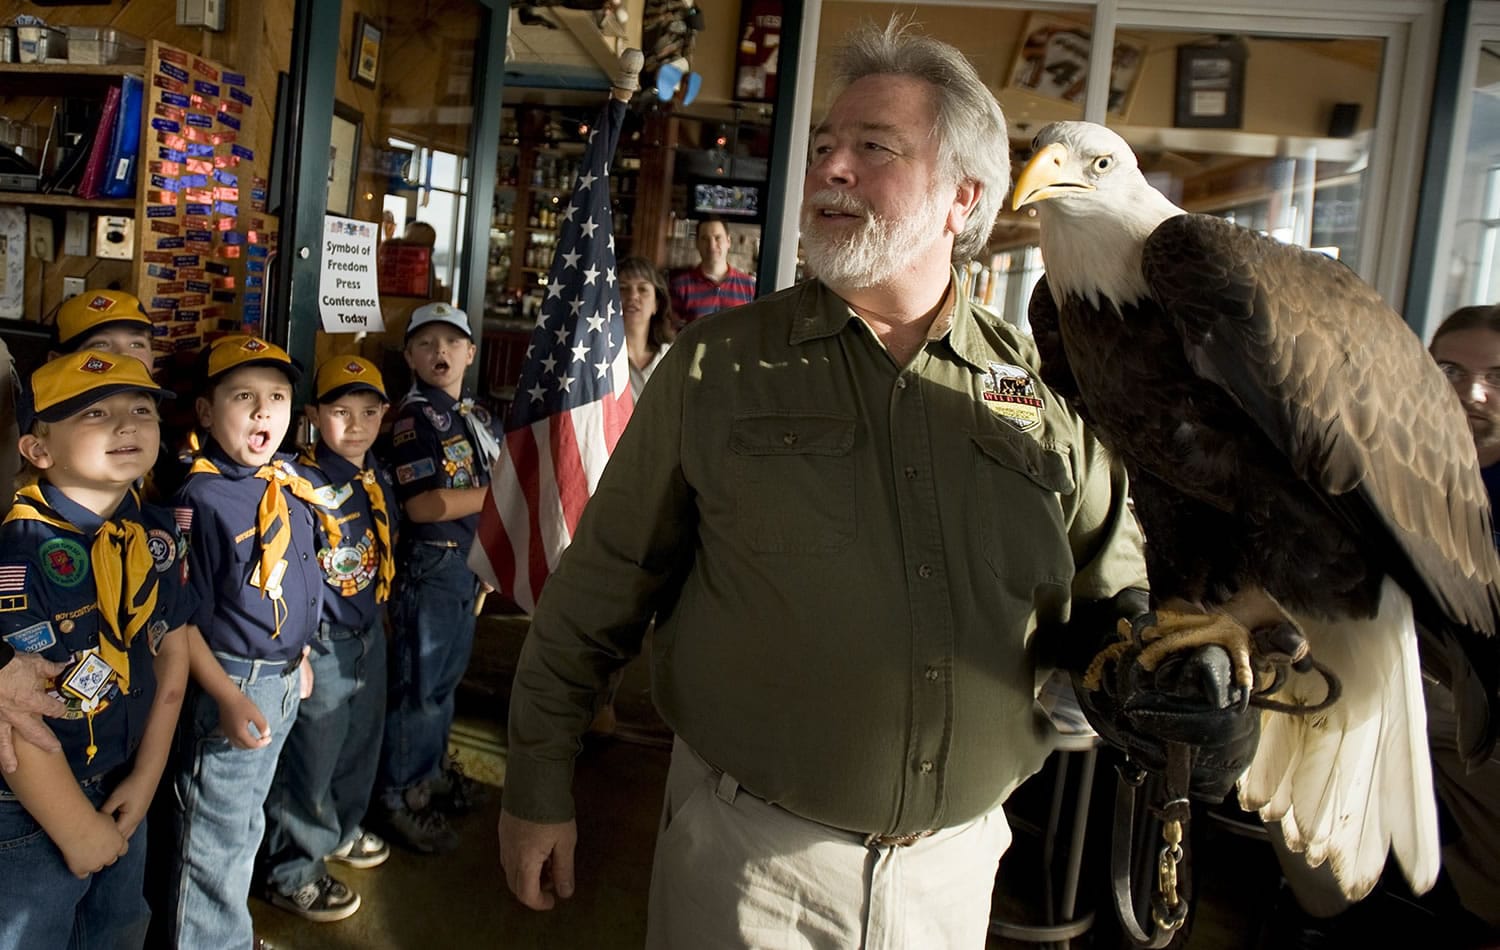 Members of Cub Scout Pack 443 from Battle Ground are impressed Wednesday afternoon as David Siddon and bald eagle Defiance enter Beaches Restaurant for an event leading up to Veterans Day observances.